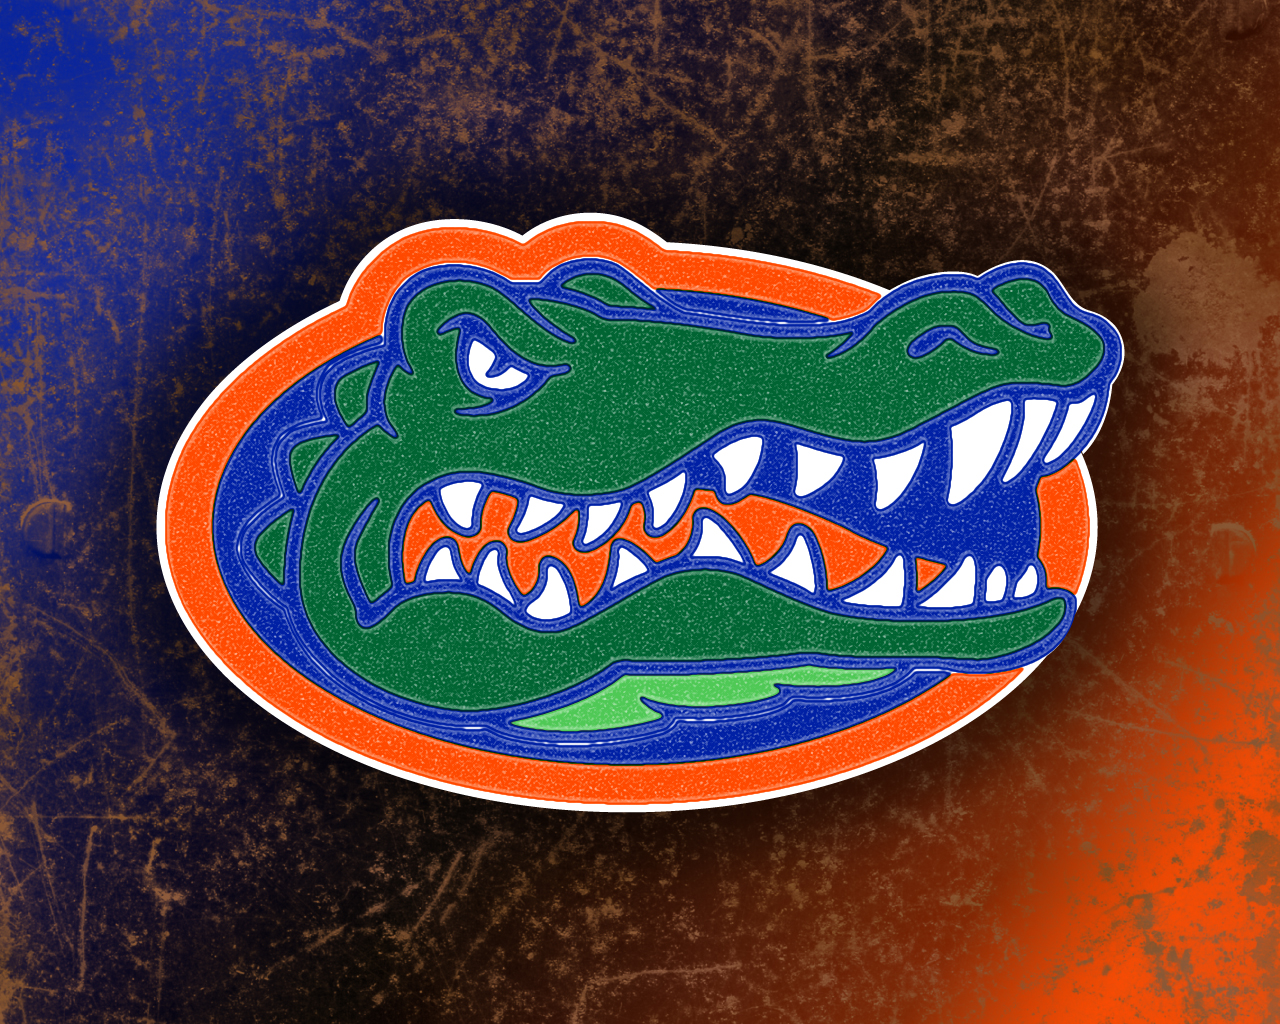 Wallpaper To One Of These Florida Gators